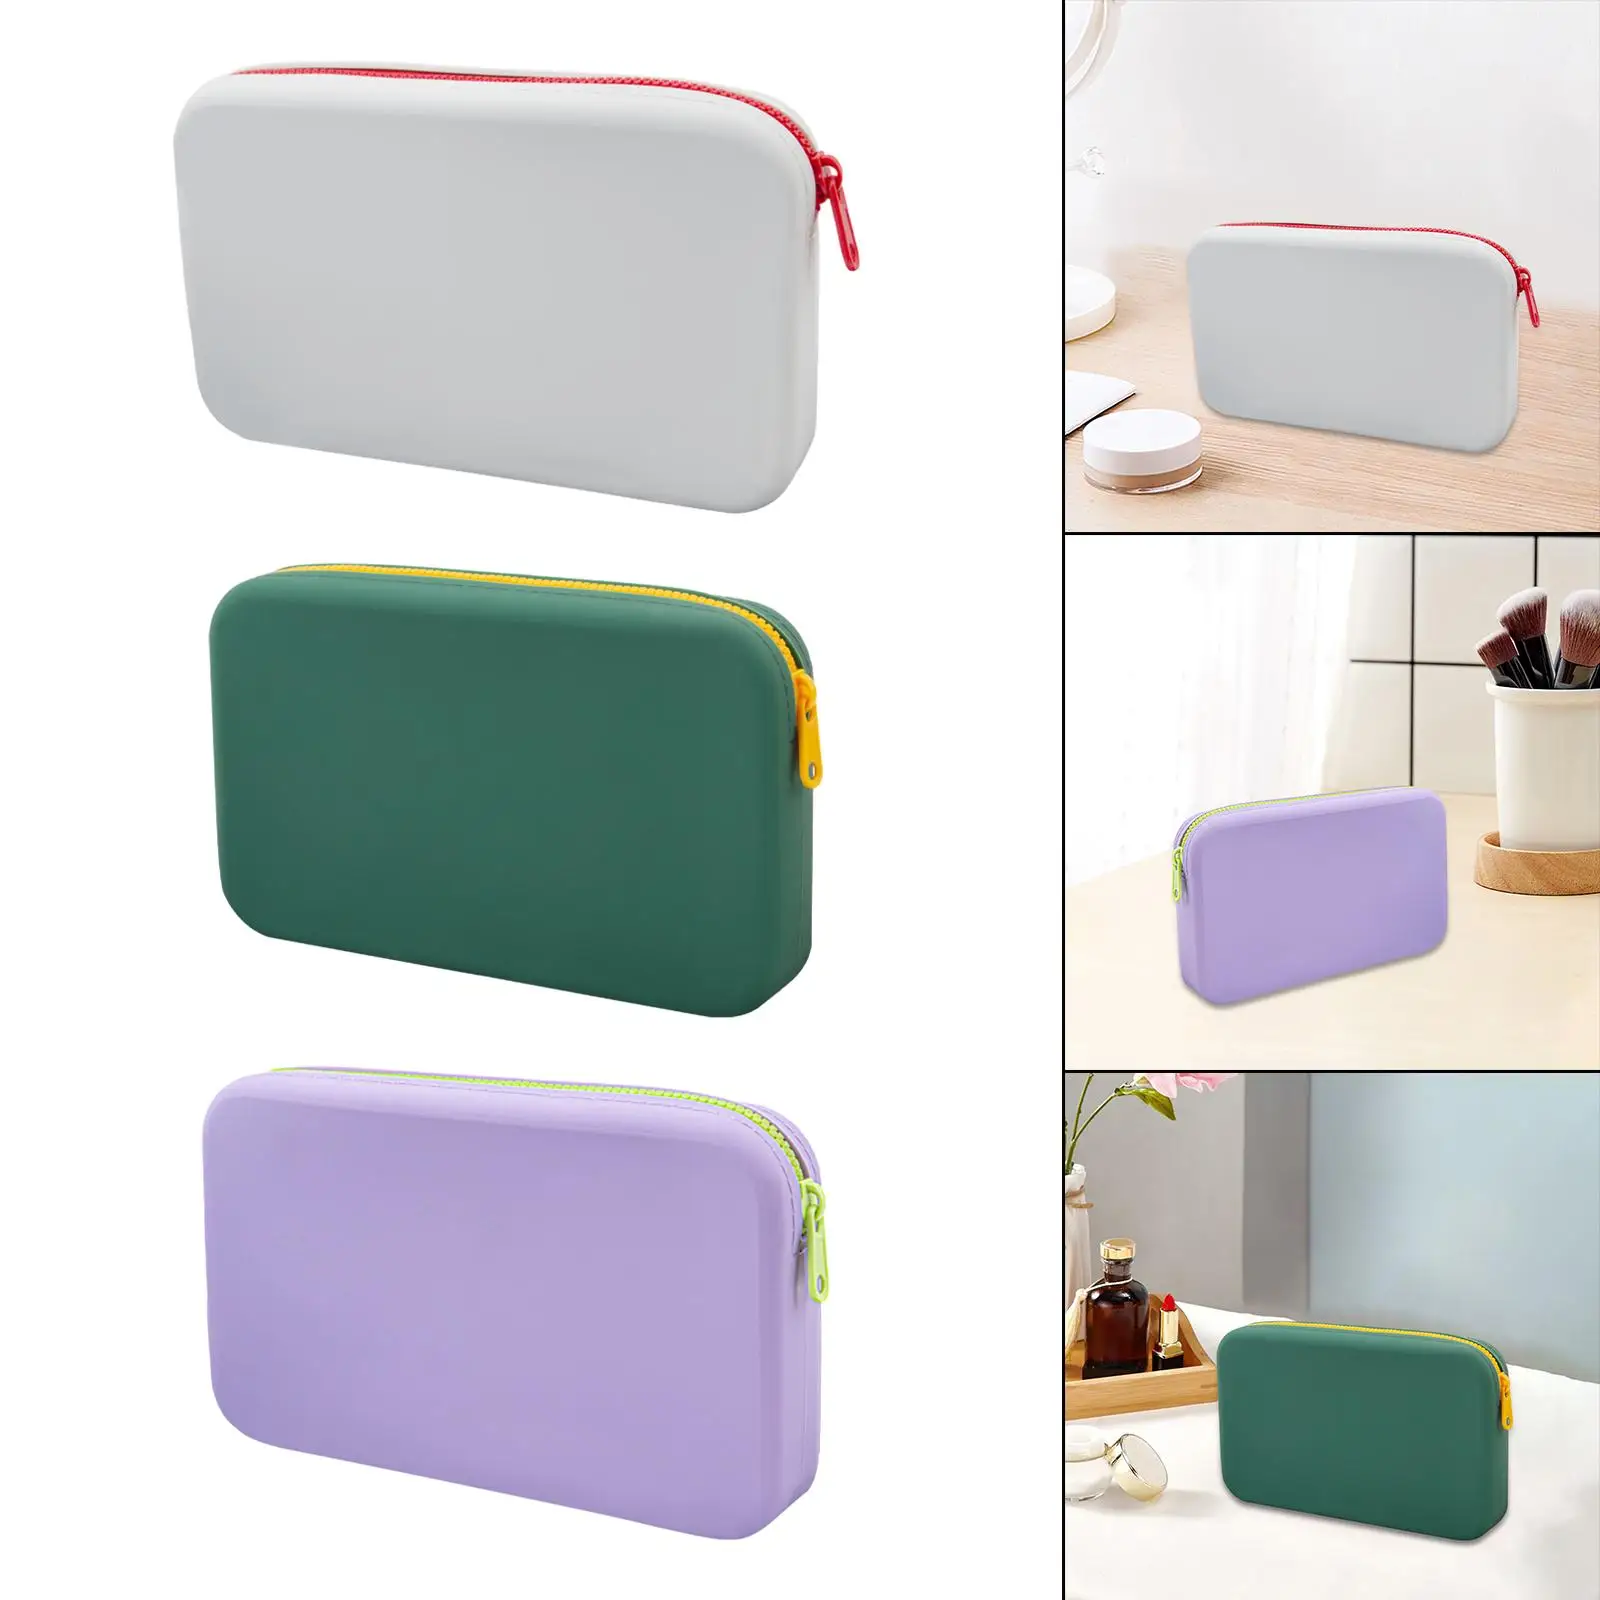 Makeup Organizer Silicon Toiletry Bags Portable Cosmetic Storage Bag for Hair Accessories Business Trips Home Gym Bathroom Women